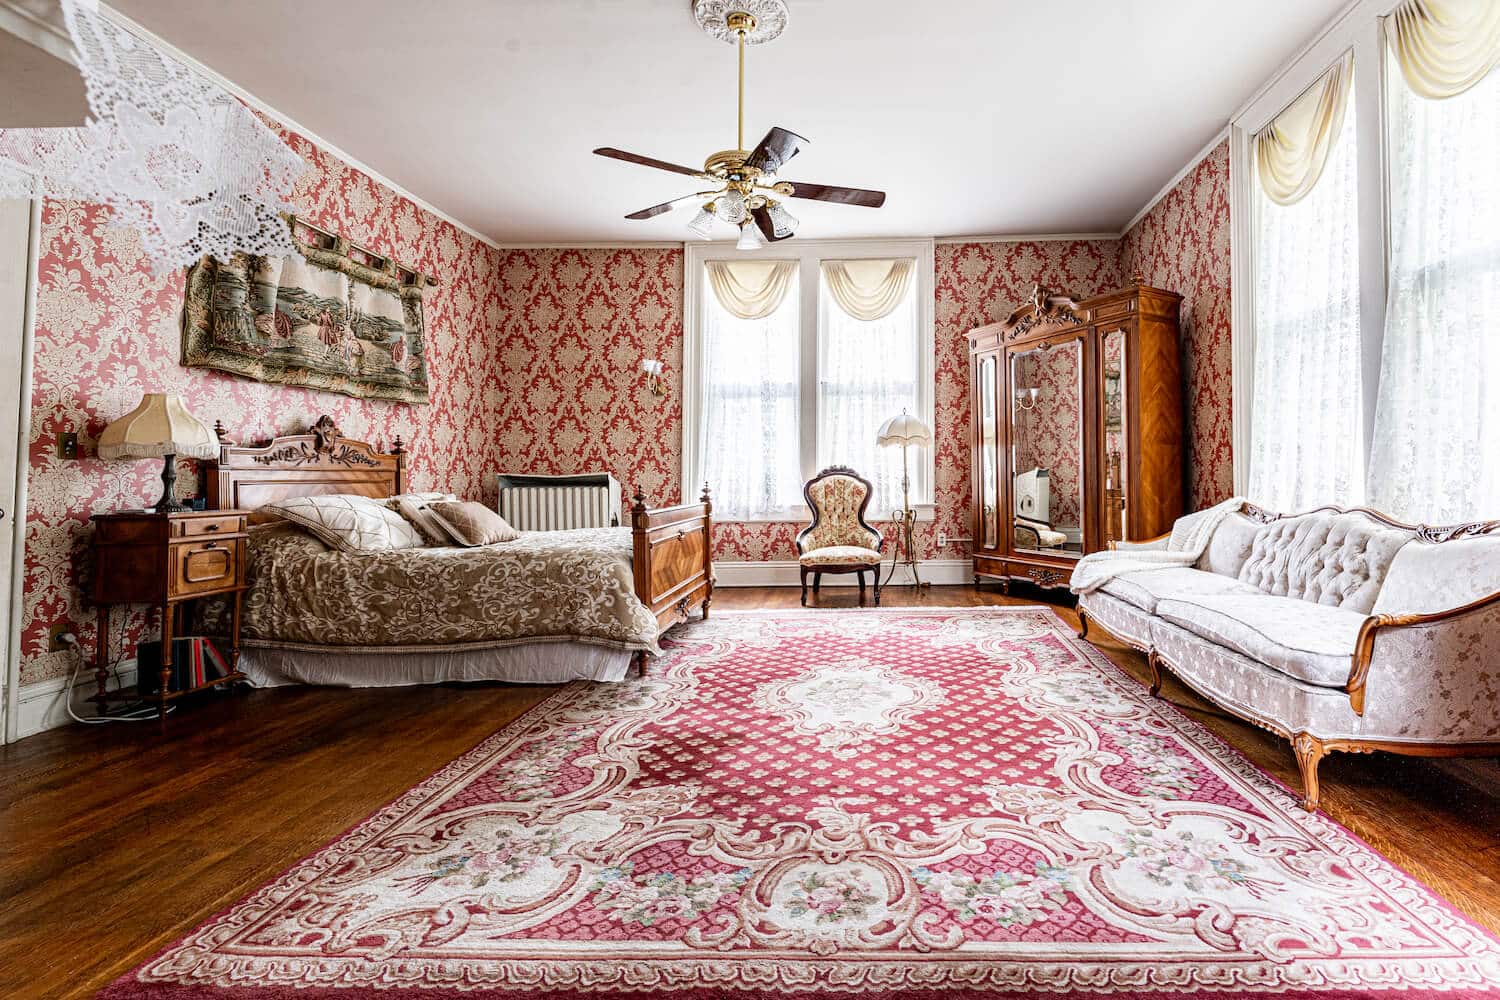 spacious room with red and white papered walls, wood floors, wood carved bed with white bedding, and large mirrored cabinet